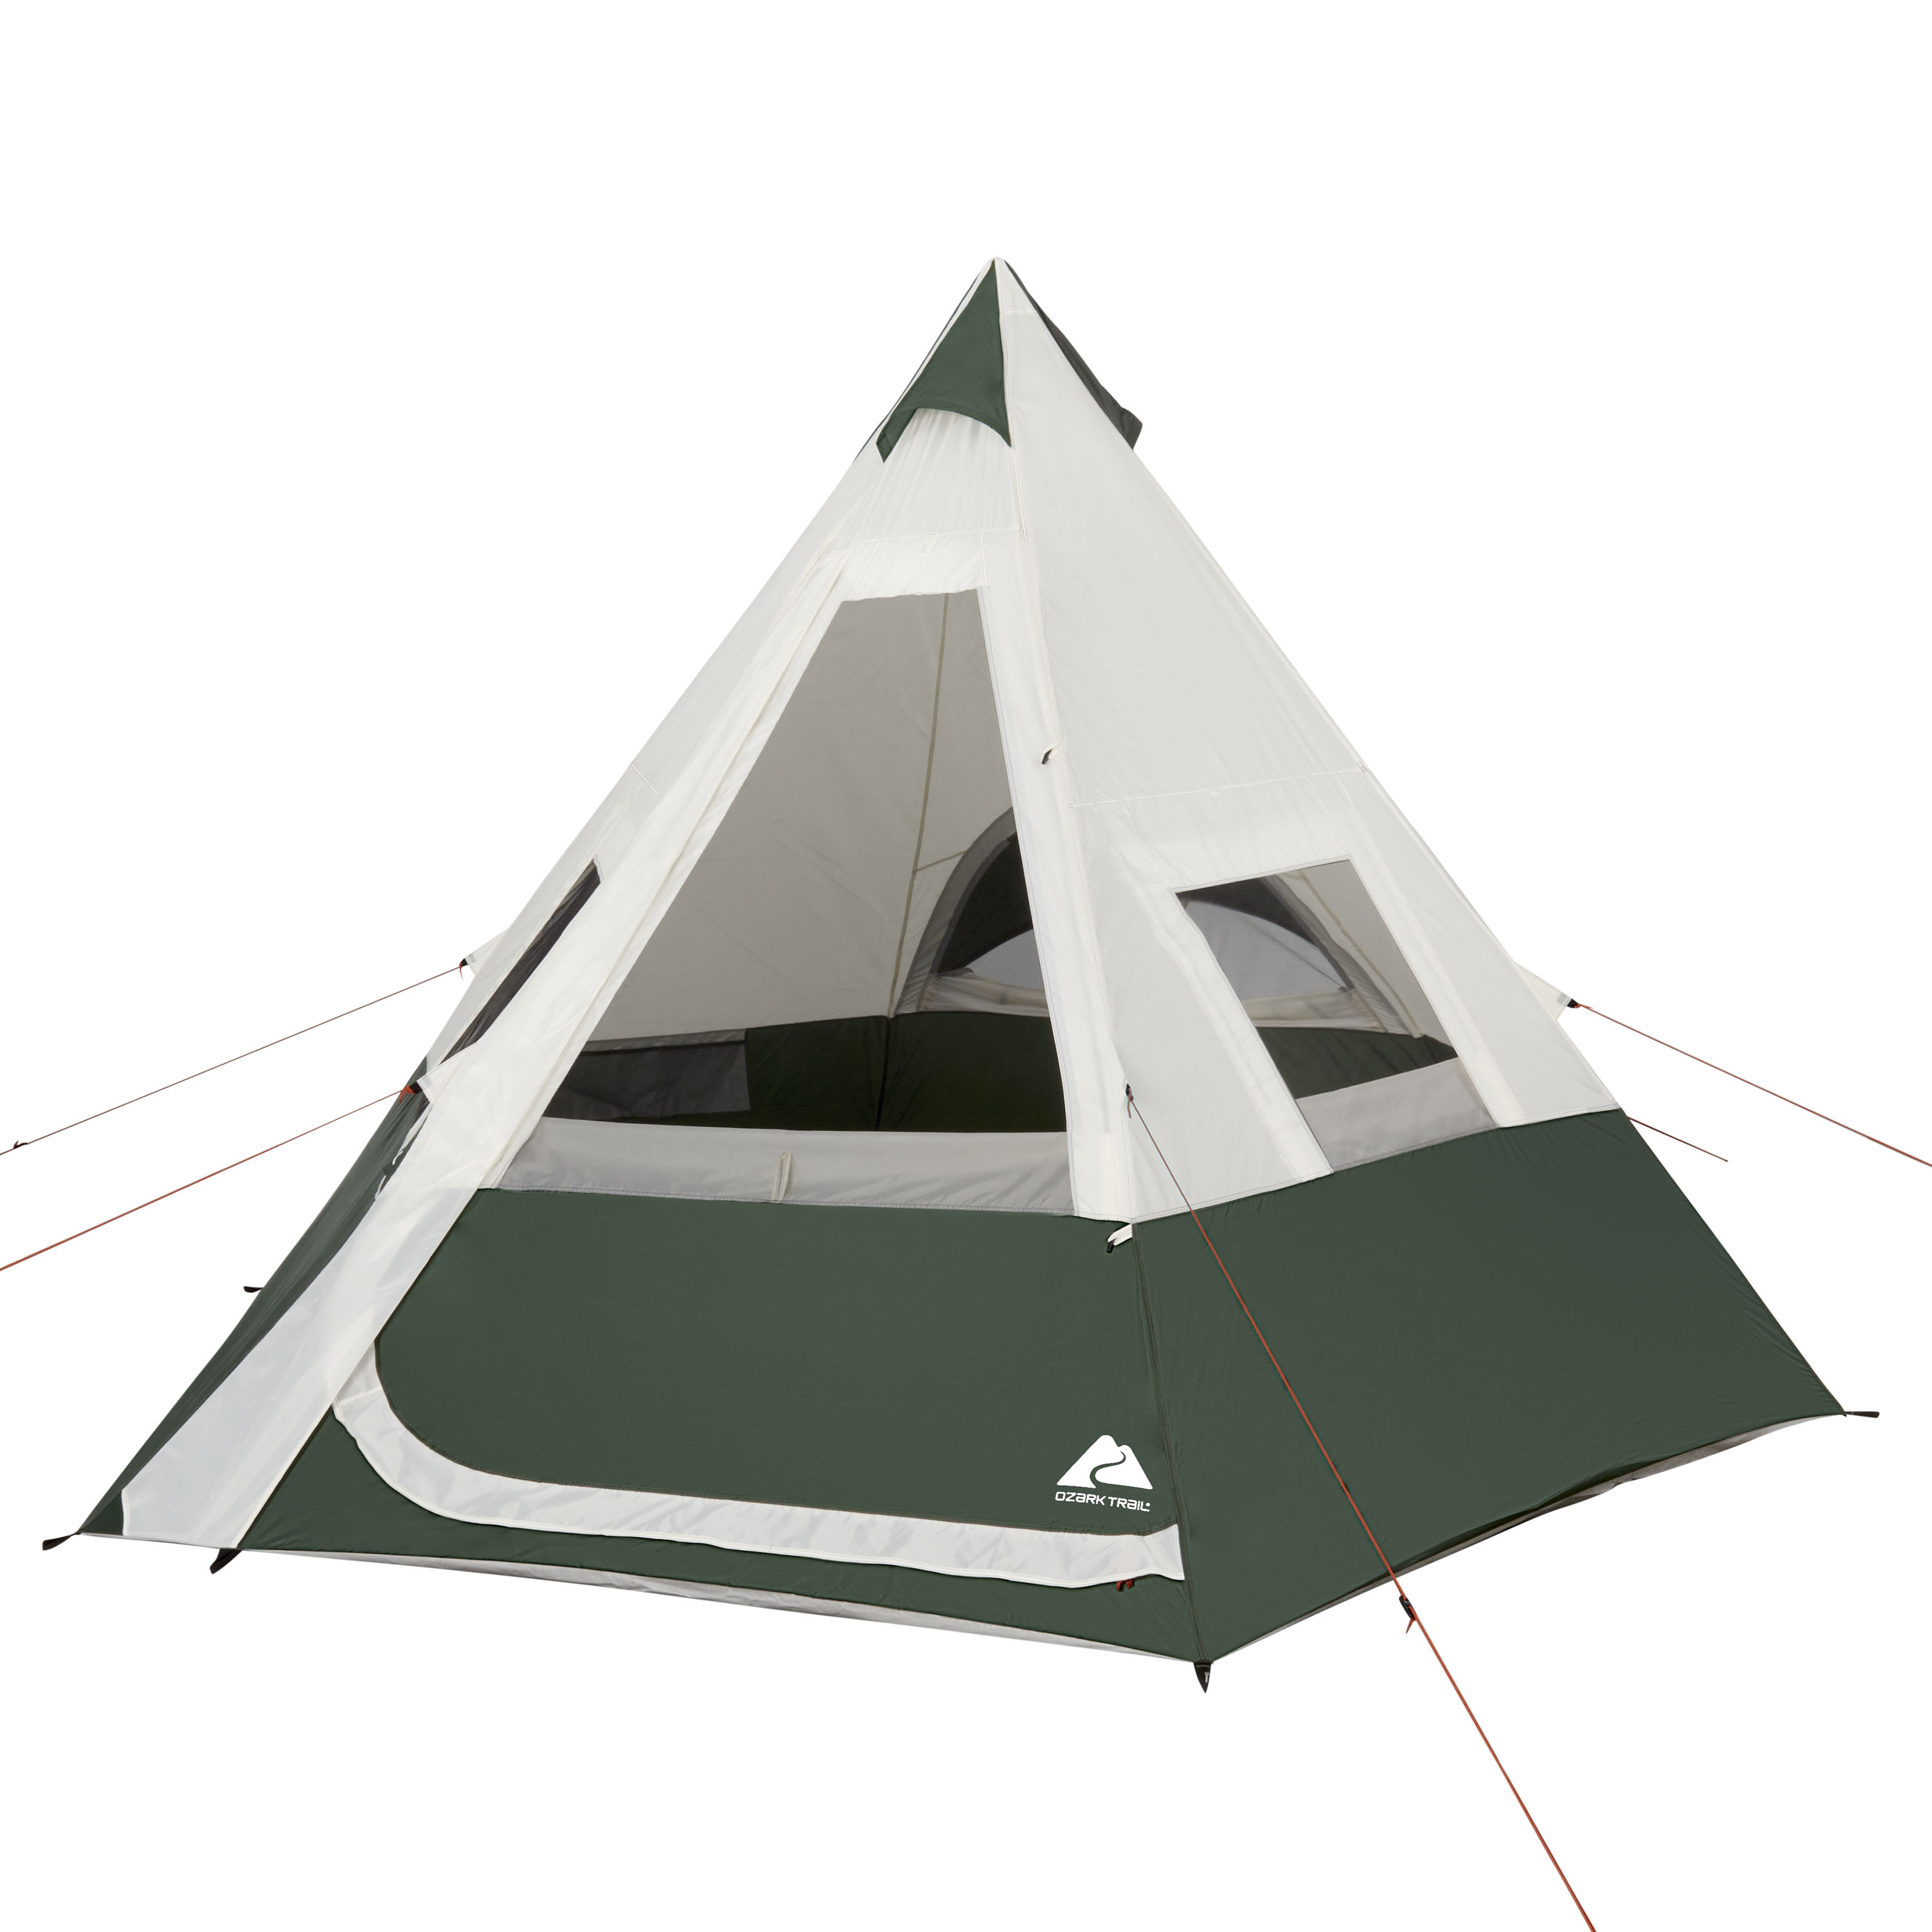 Ozark Trail 7-Person 1-Room Teepee Tent, with Vented Rear Window, Green - image 1 of 12